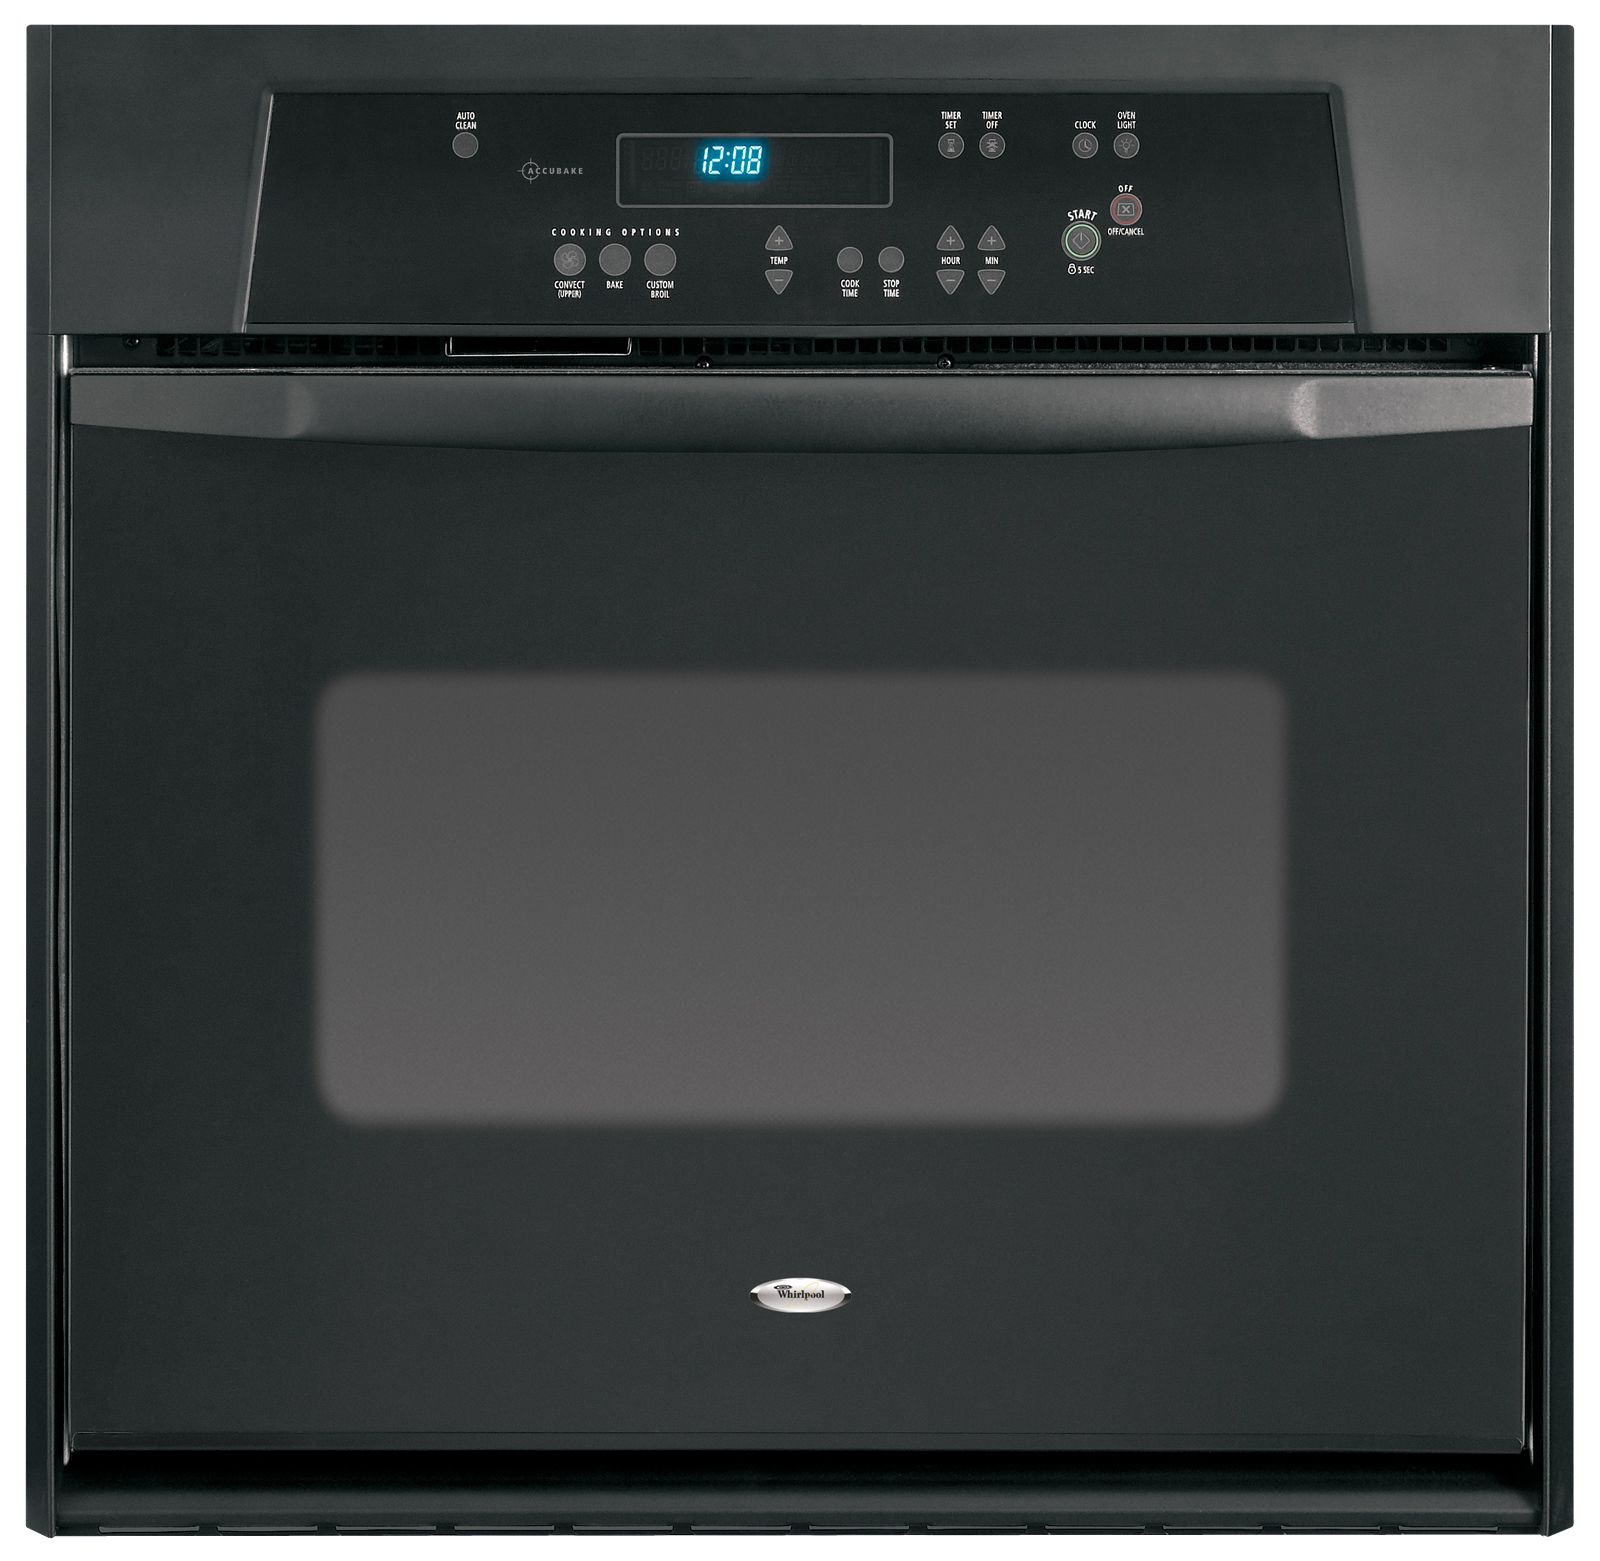 24" Electric Built-In Single Oven logo